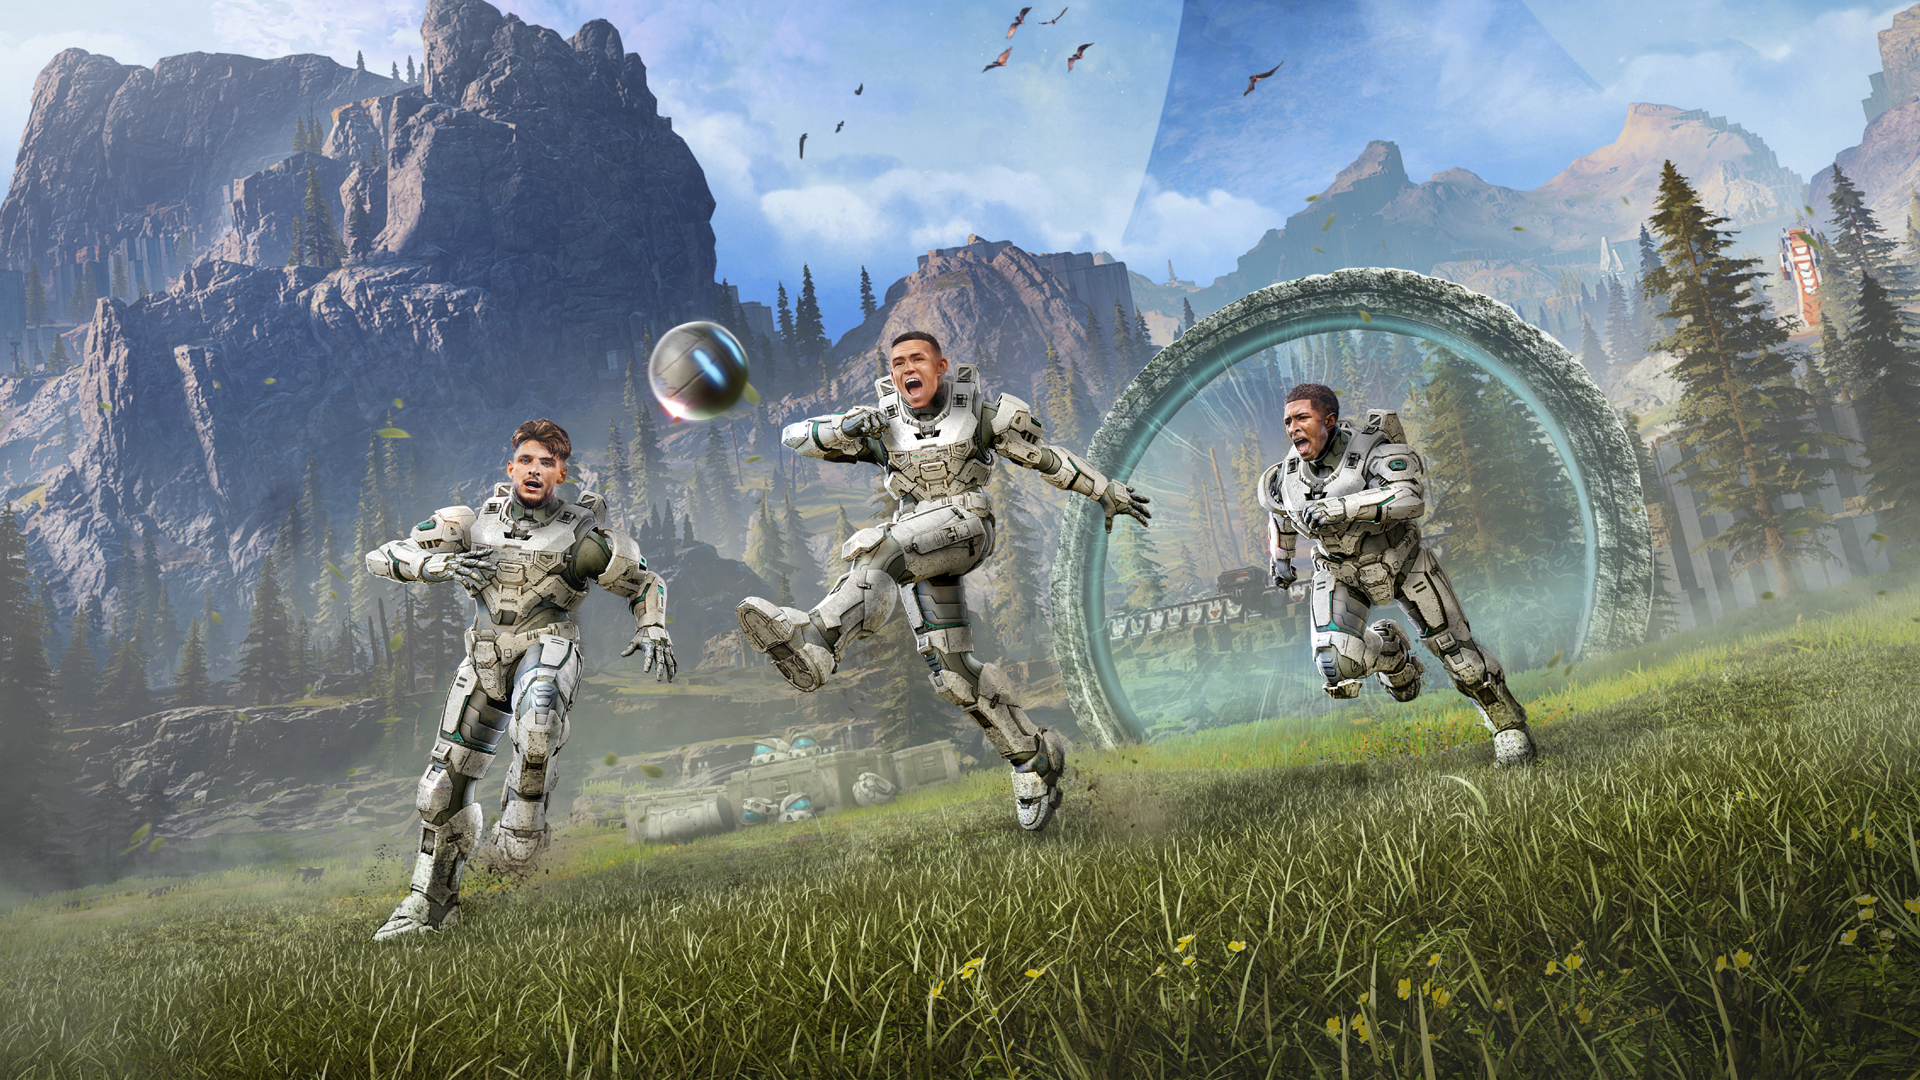 Several players from the English football team, kitted out in Spartan Armour, kicking a ball on the Halo ring from Halo Infinite. 